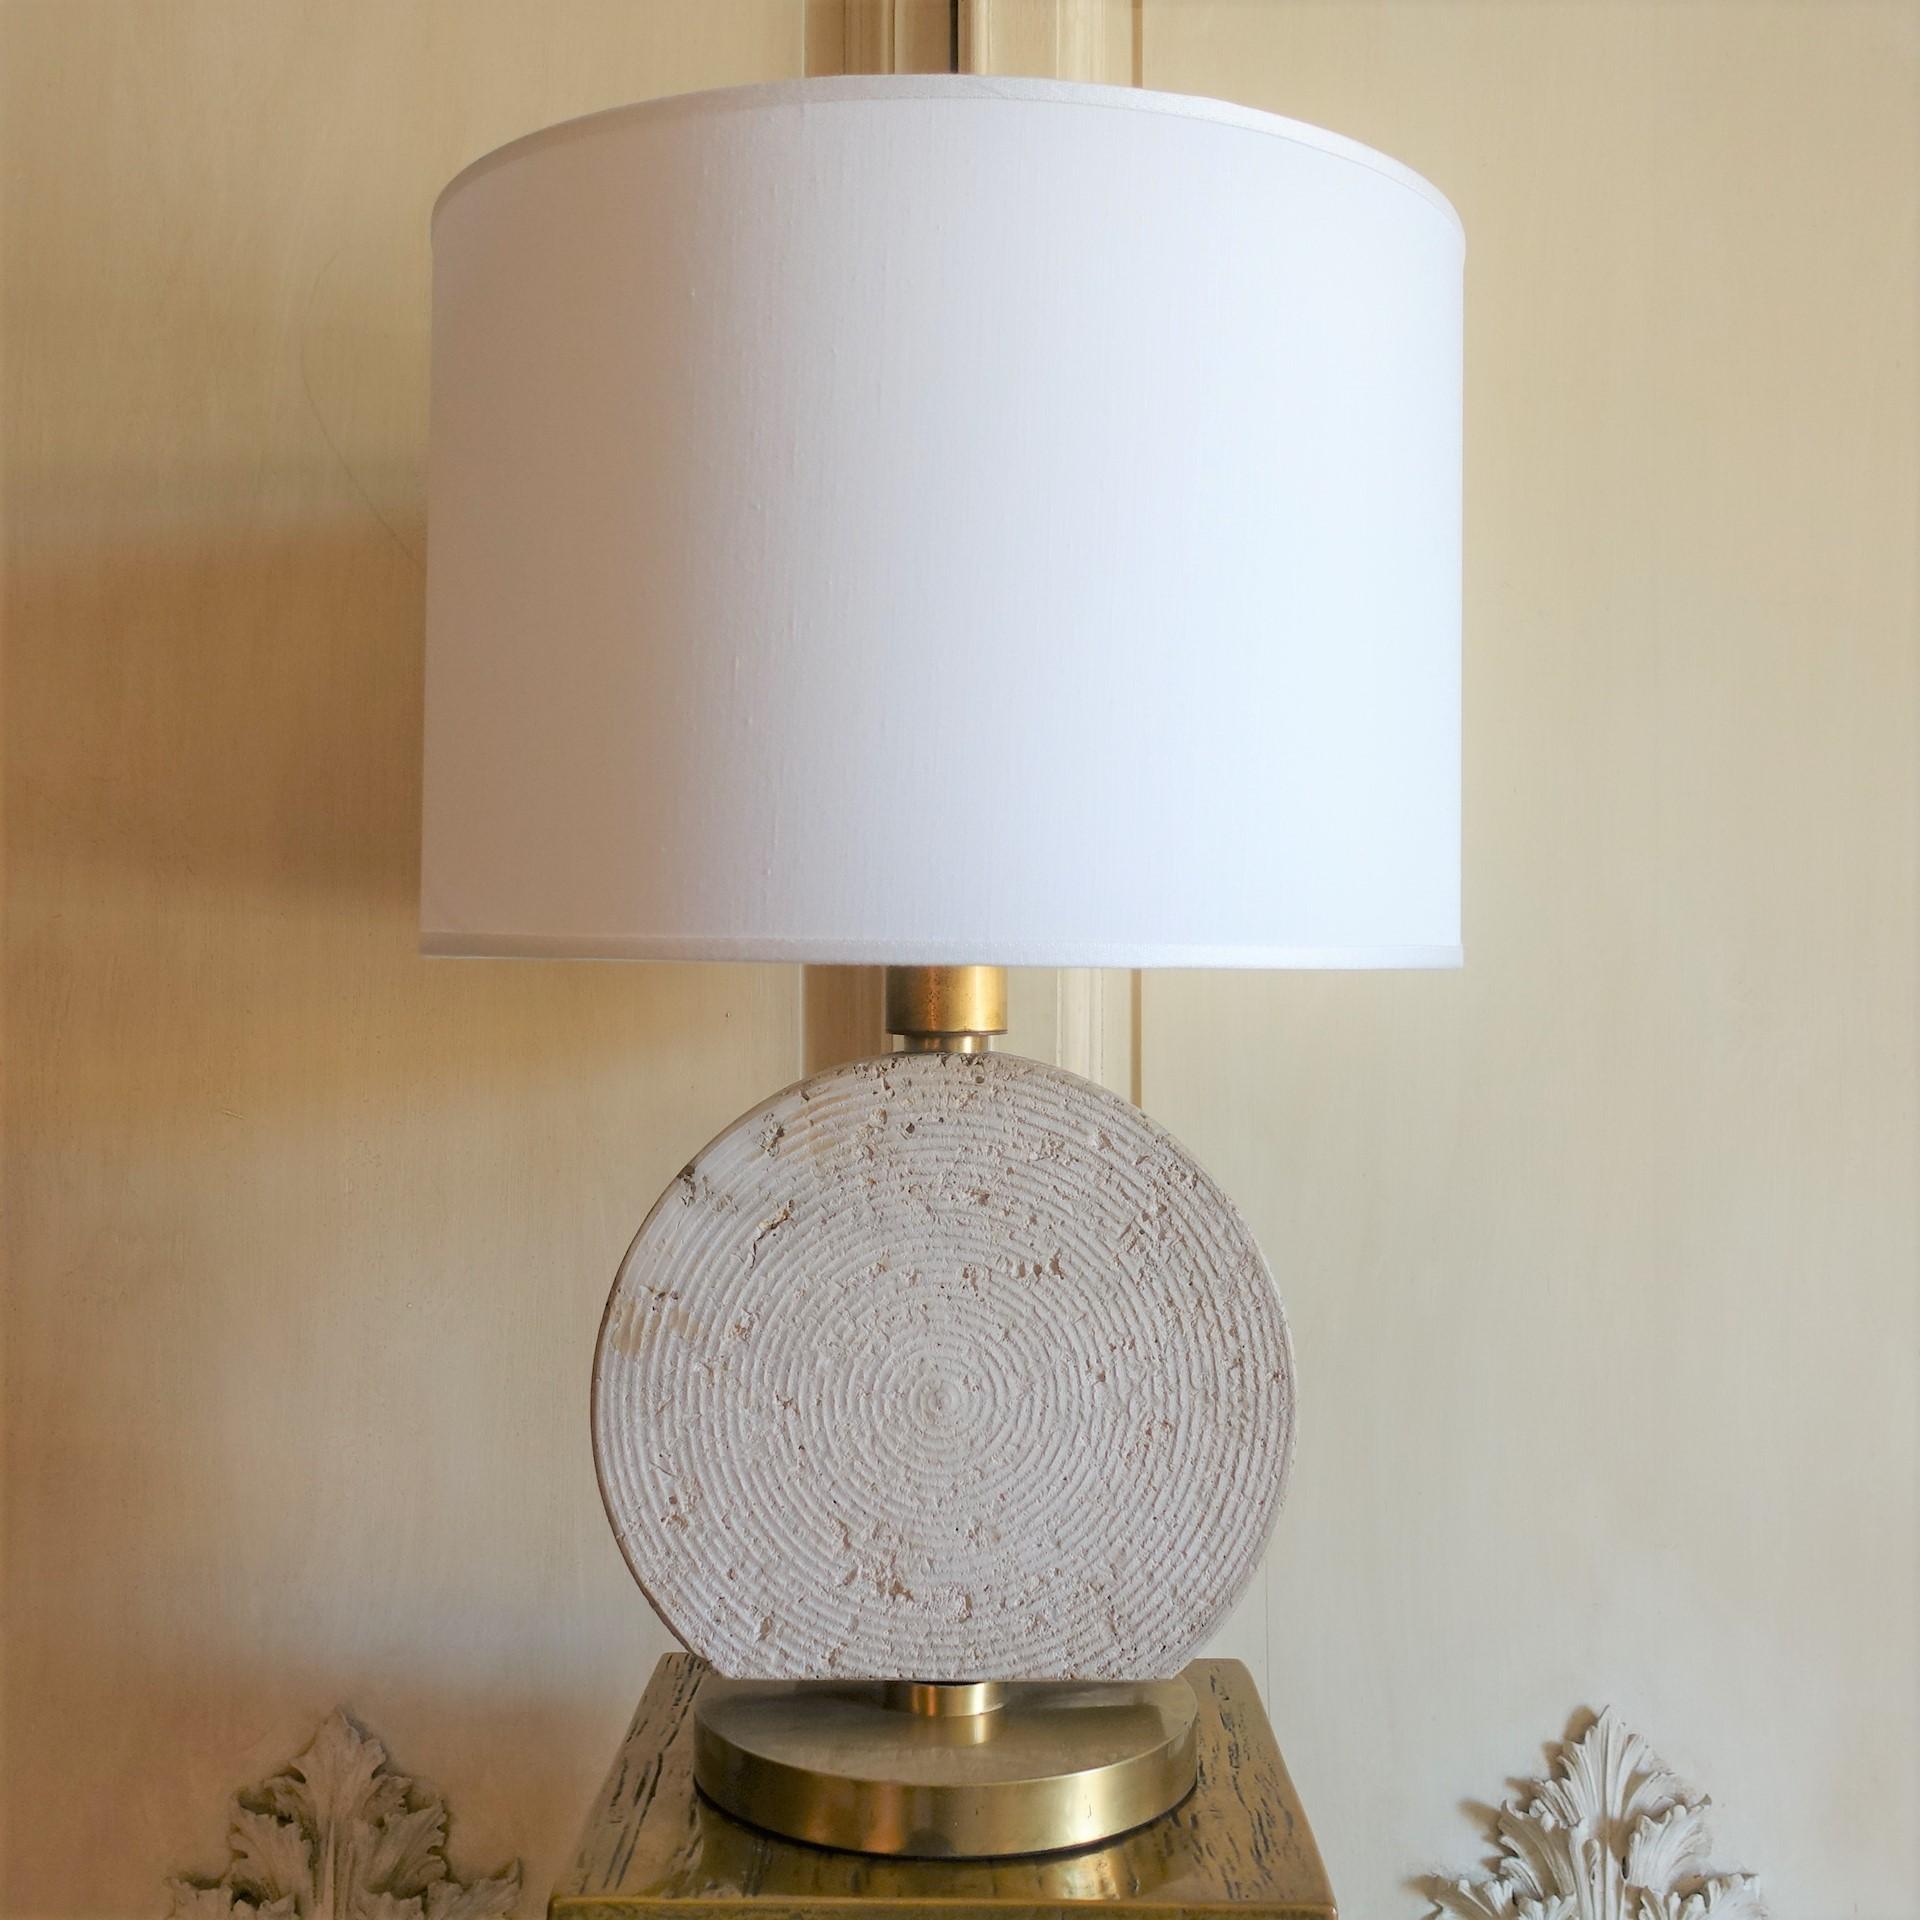 One of a kind table lamp with circular channeled travertine, brass details, vintage patina, base measures cm 30.5x22xh.43, lampshade cm Dia.45xh.30, total height cm 66.